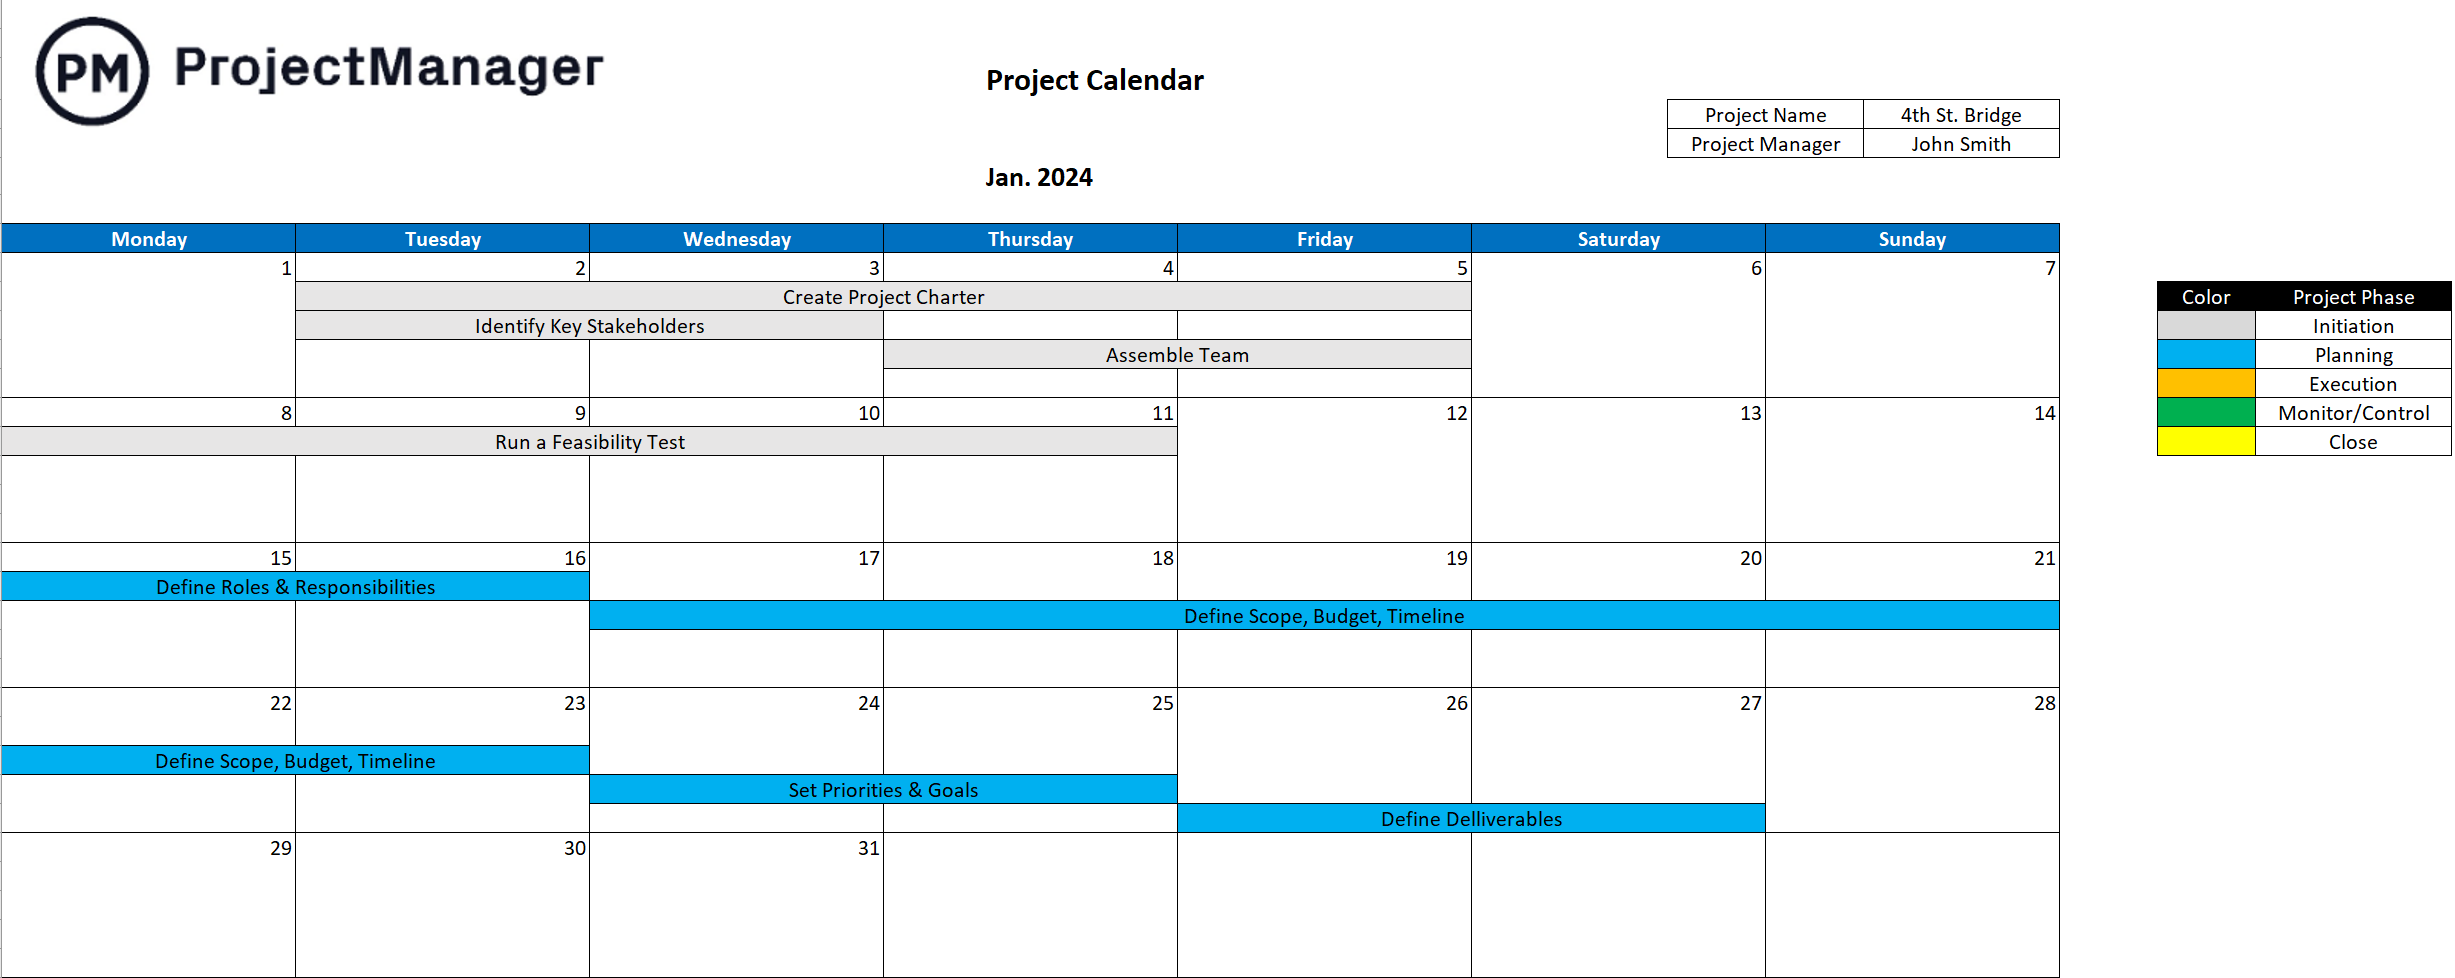 Project Timeline Template for Excel - Free Download - ProjectManager